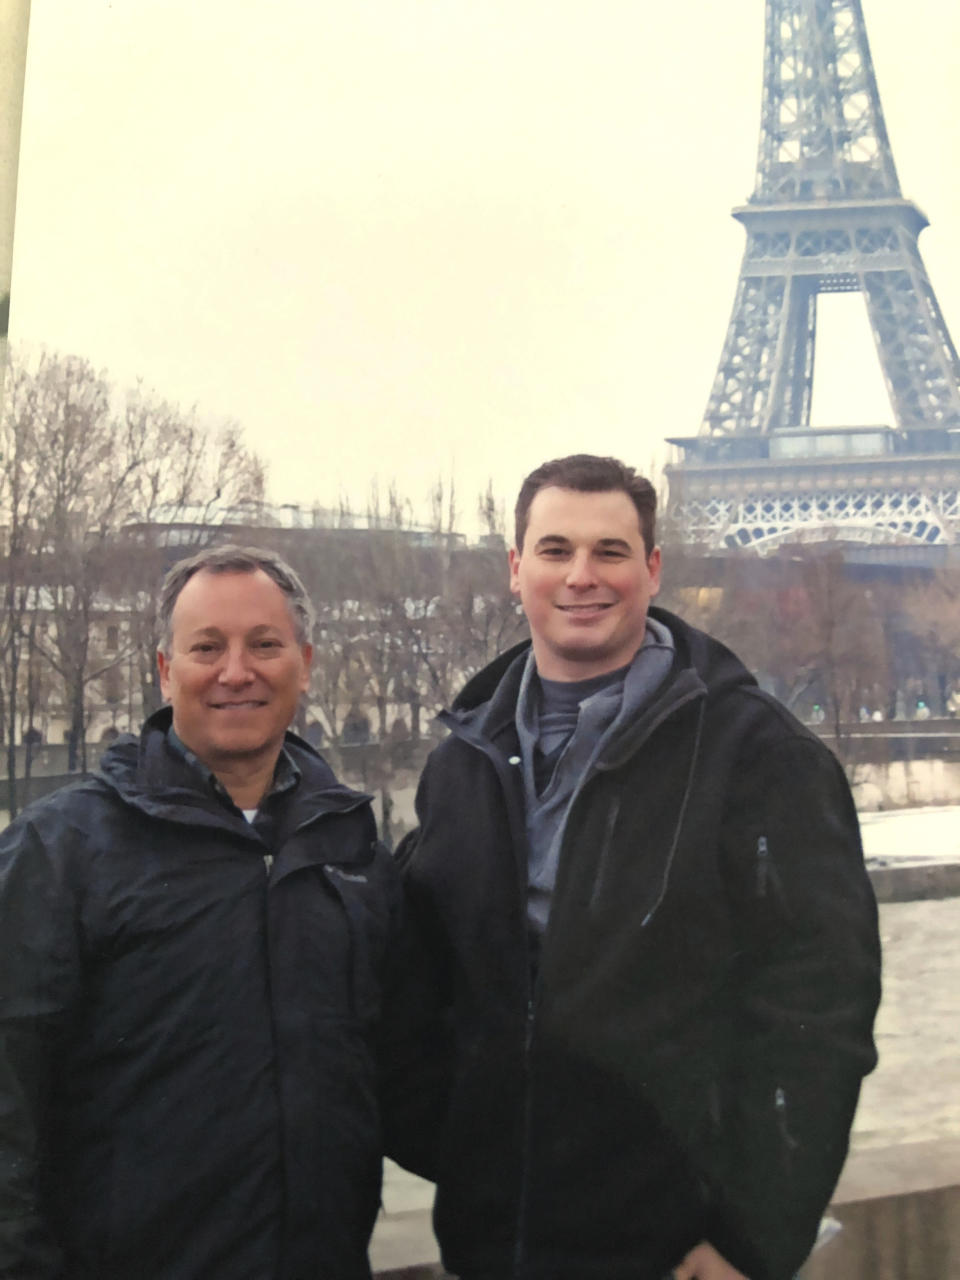 In this undated photo made available by the Modell family, Ryan Modell, right, visits Paris with his father Sandy Modell. Sandy Modell is asking Florida Gov. Ron DeSantis to reopen the investigation into his son's 2016 shooting death during an altercation at Ryan Modell's Fort Myers, Fla., condominium complex. Local prosecutors declined to charge the shooter, Steve Taylor, citing the state's "stand your ground" law, a decision Sandy Modell wants reversed. (Modell family via AP)